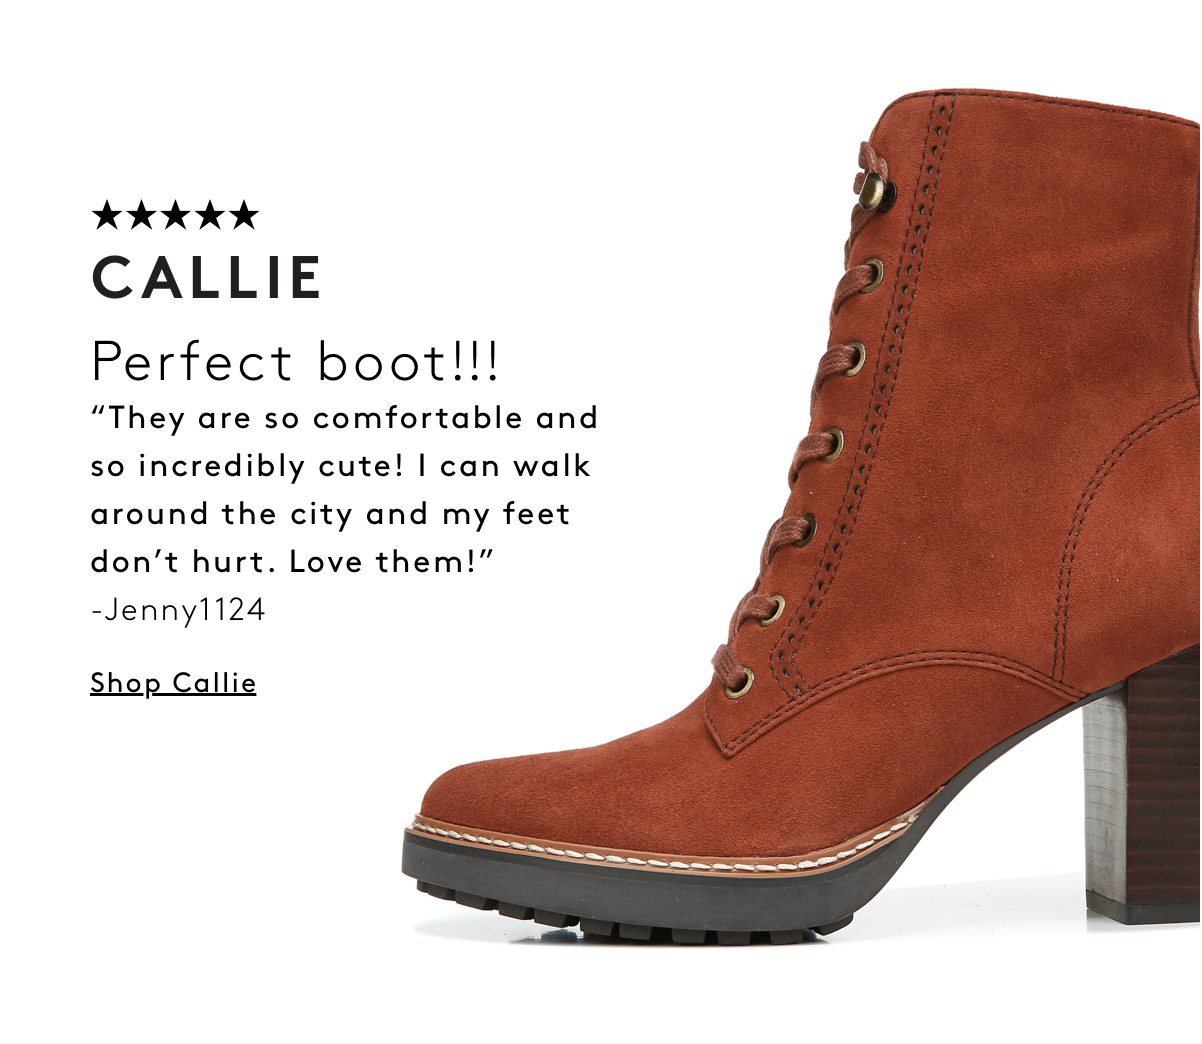 Callie Perfect Boot!!! “they Are So Comfortable And So Incredibly Cute! I Can Walk Around The City And My Feet Don’t Hurt. Love Them!” -jenny1124 | Shop Callie